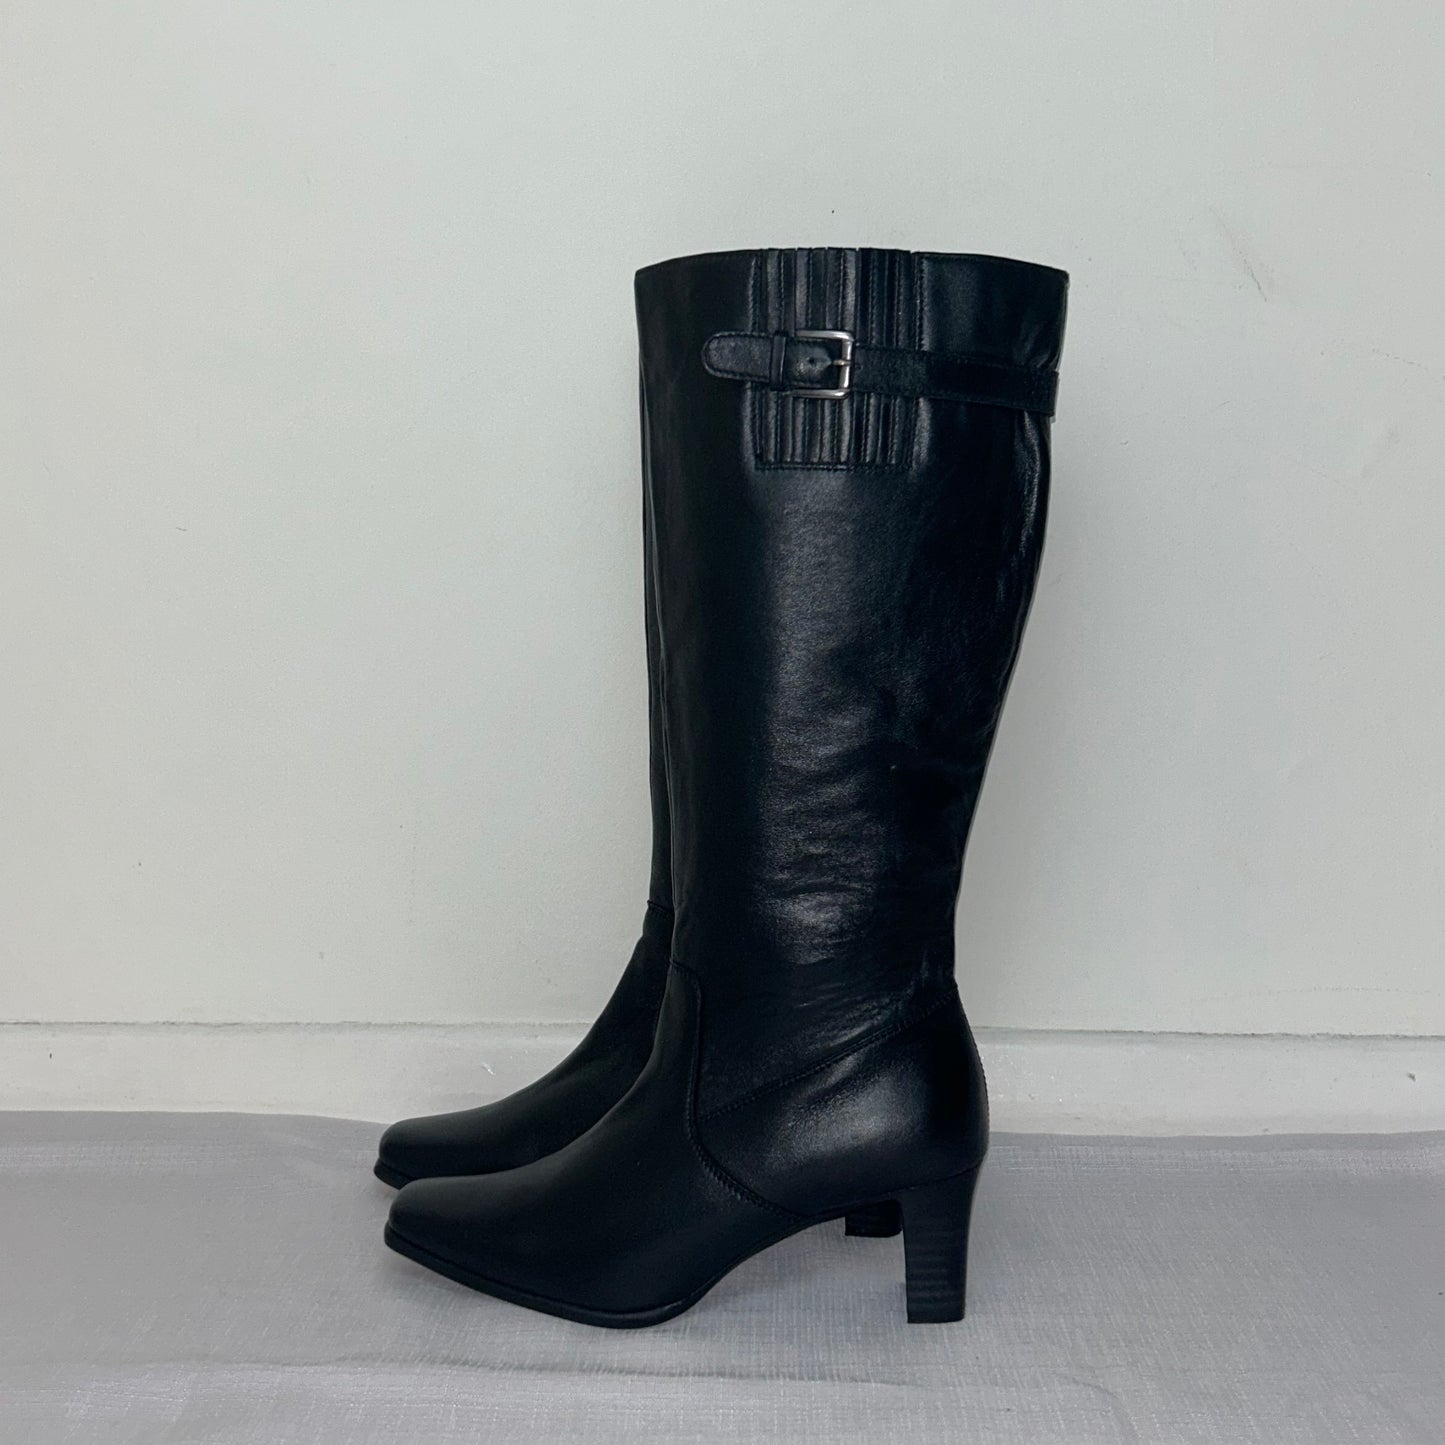 black knee high silver buckle boots shown on a white background